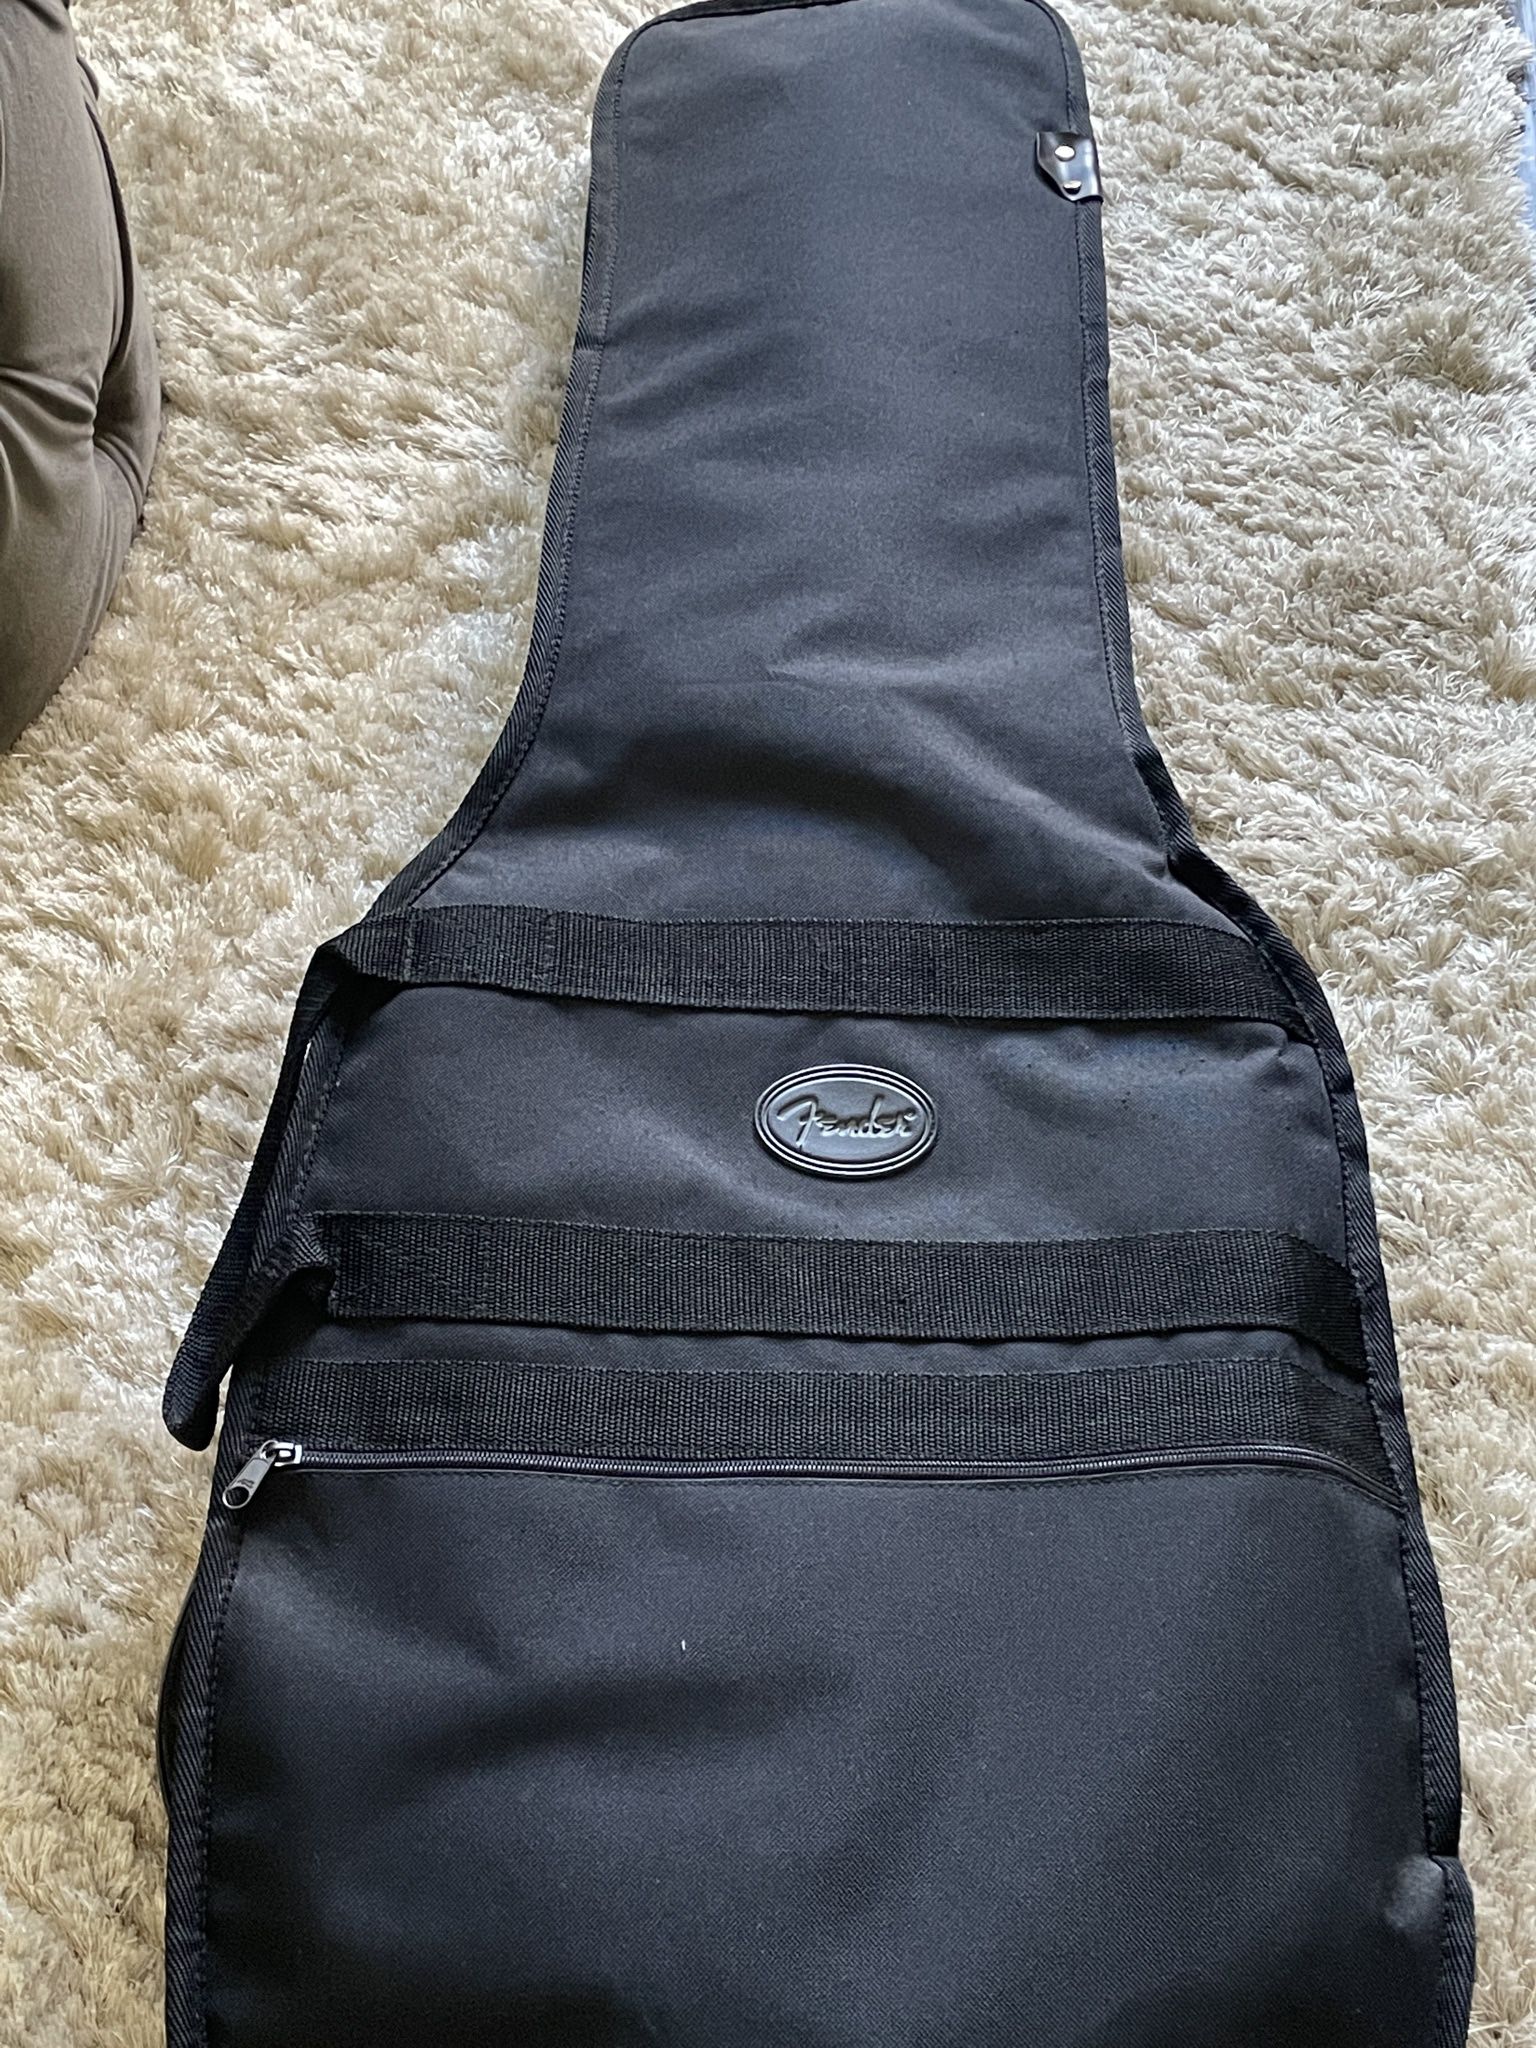 Padded  Electric Guitar Bag  - NEW